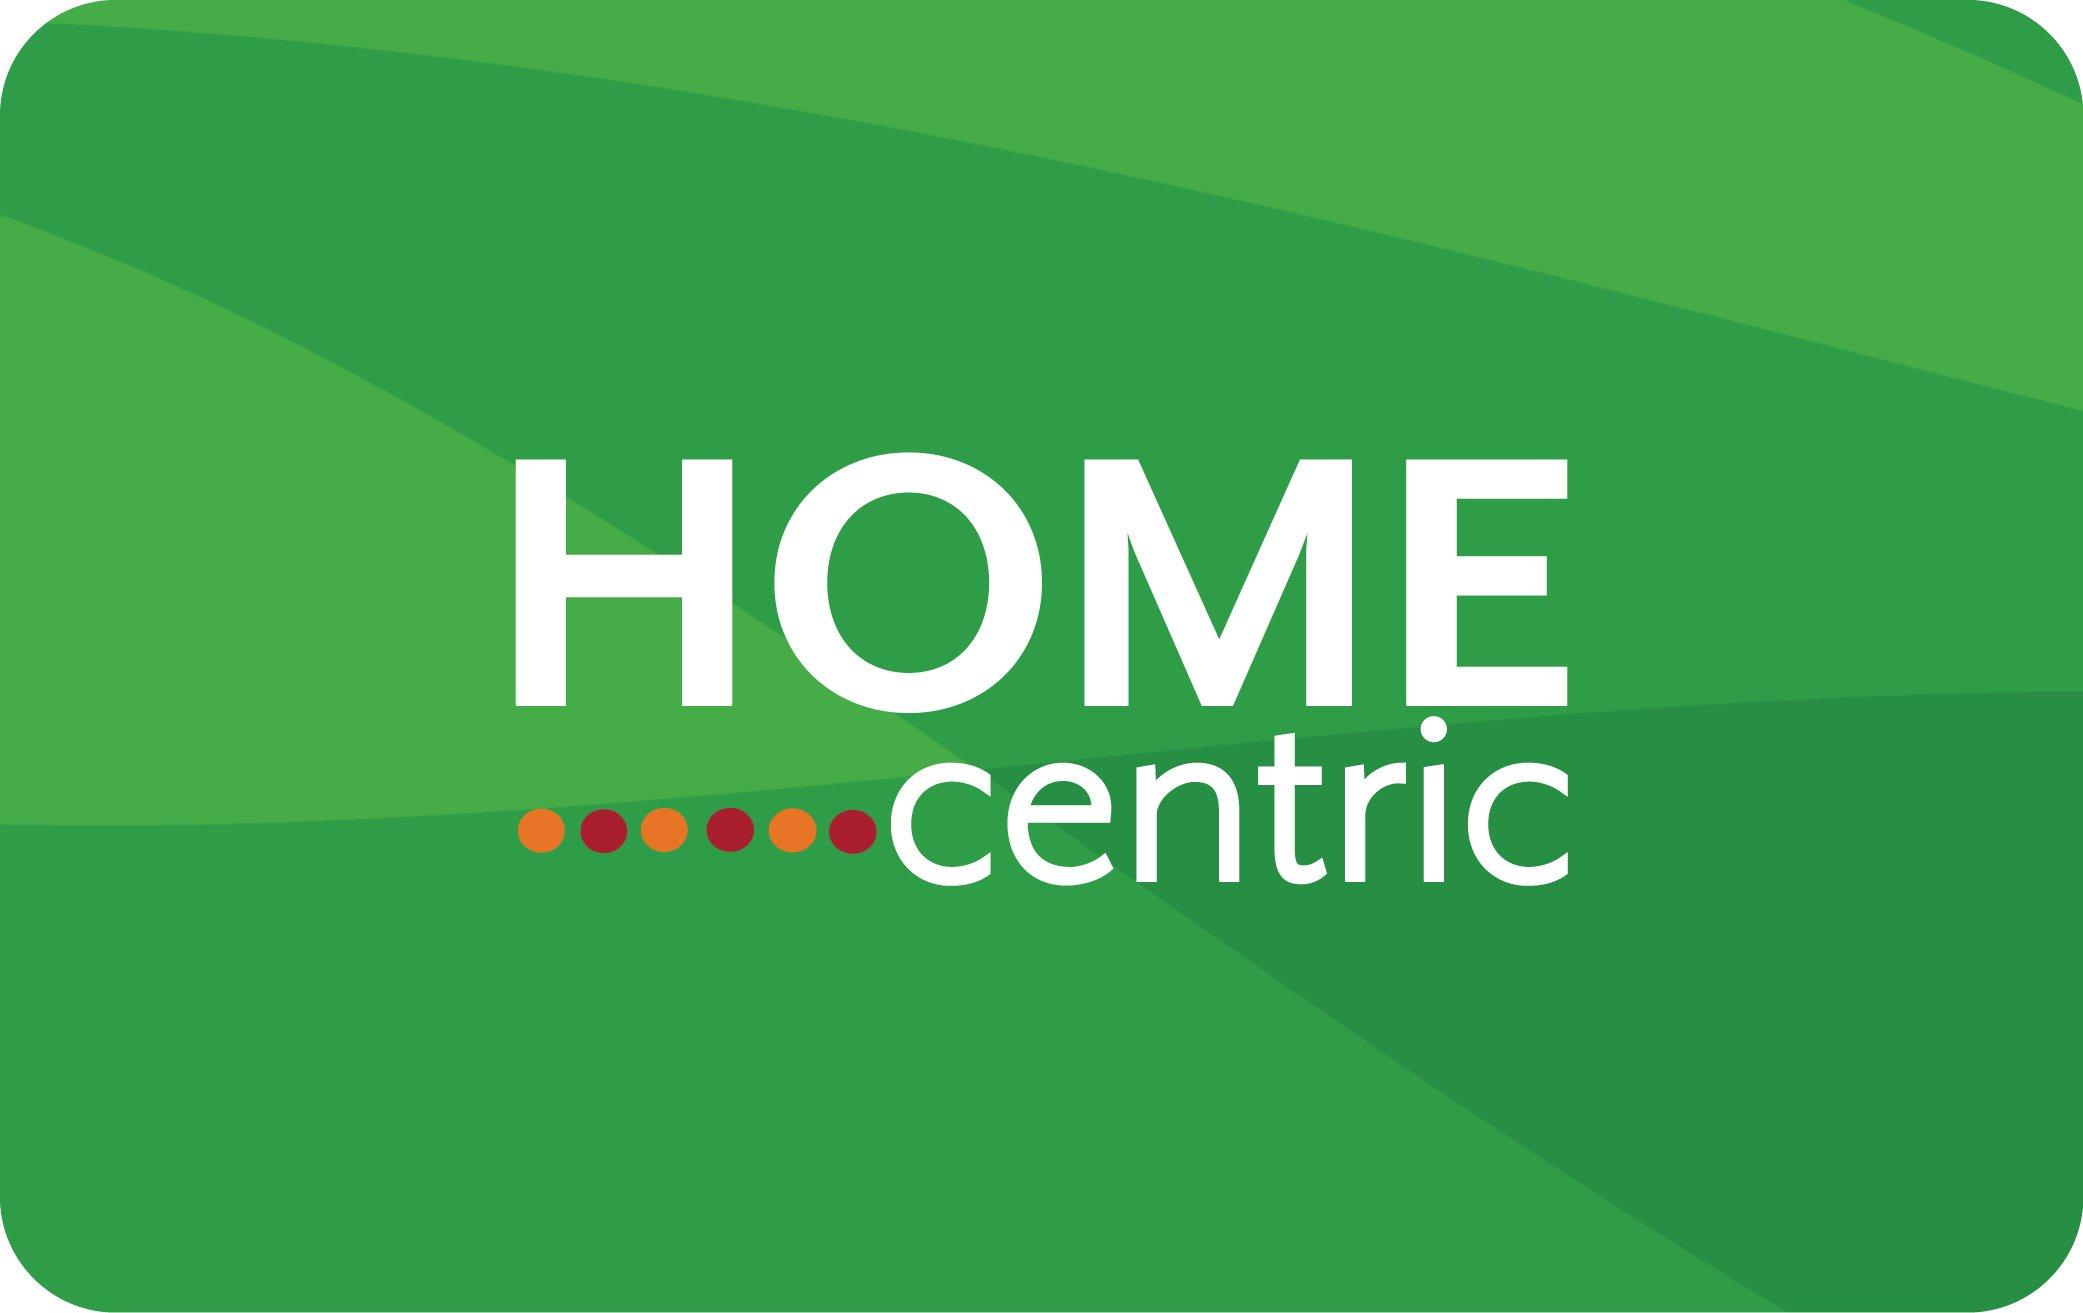 Home Centric Green